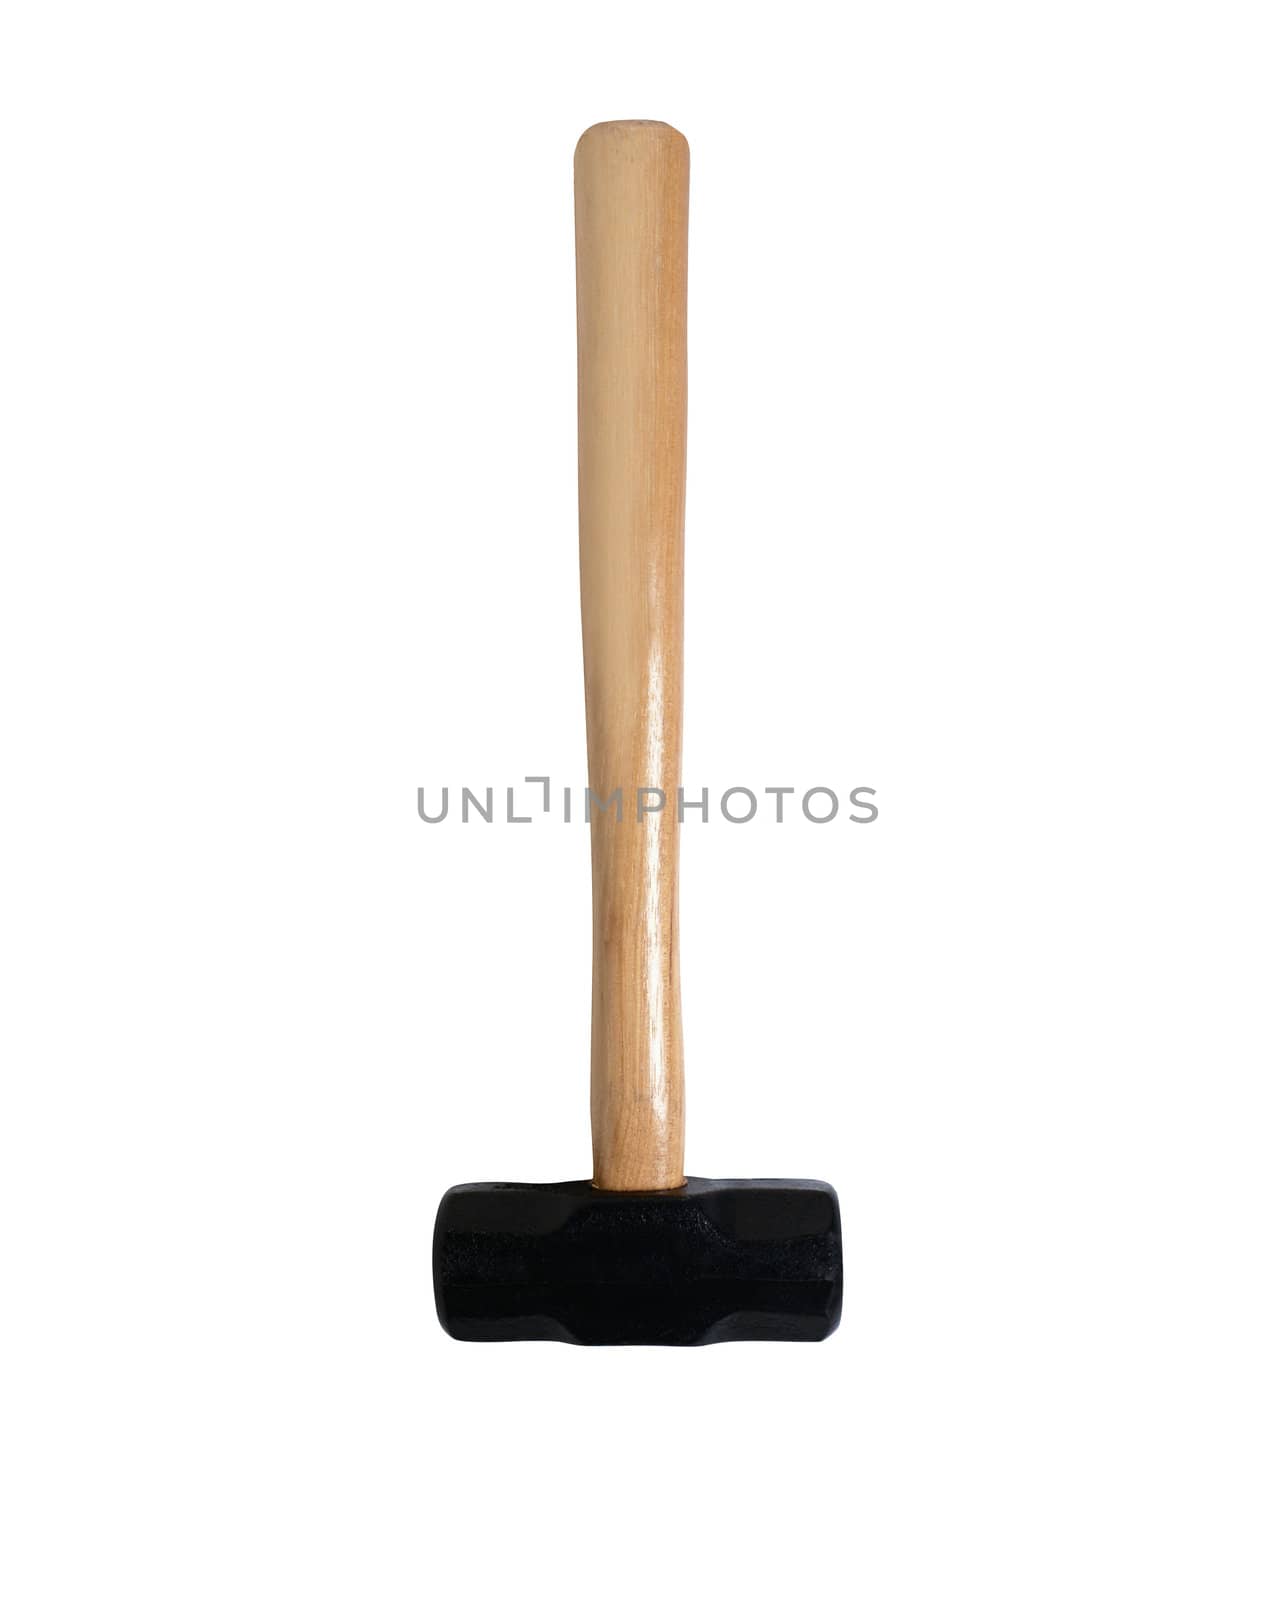 hammer against a white background by ozaiachin